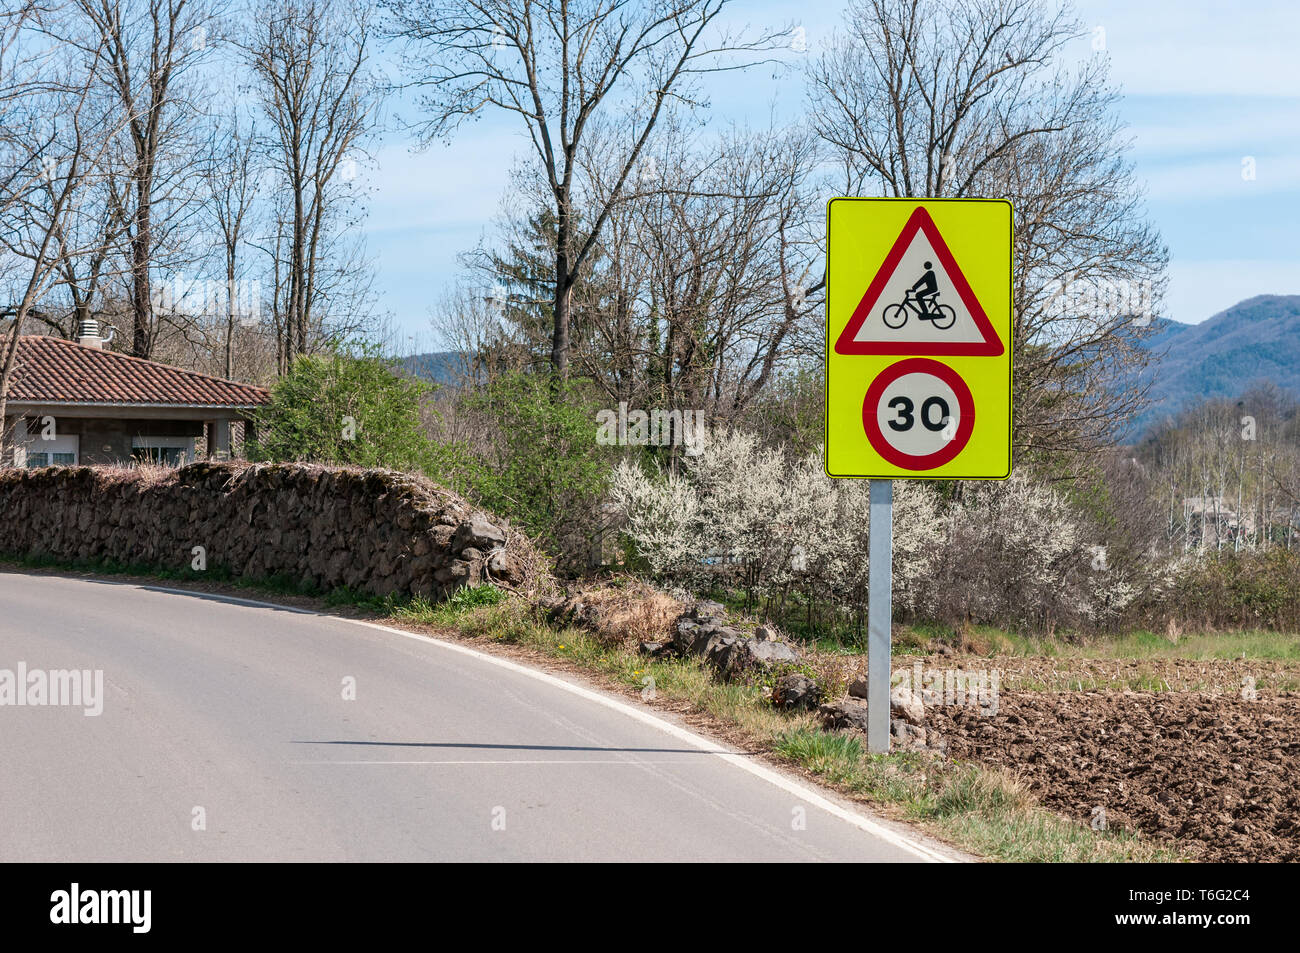 traffic signals, danger cylist and maximum speed 30 km/h, Catalonia, Spain Stock Photo